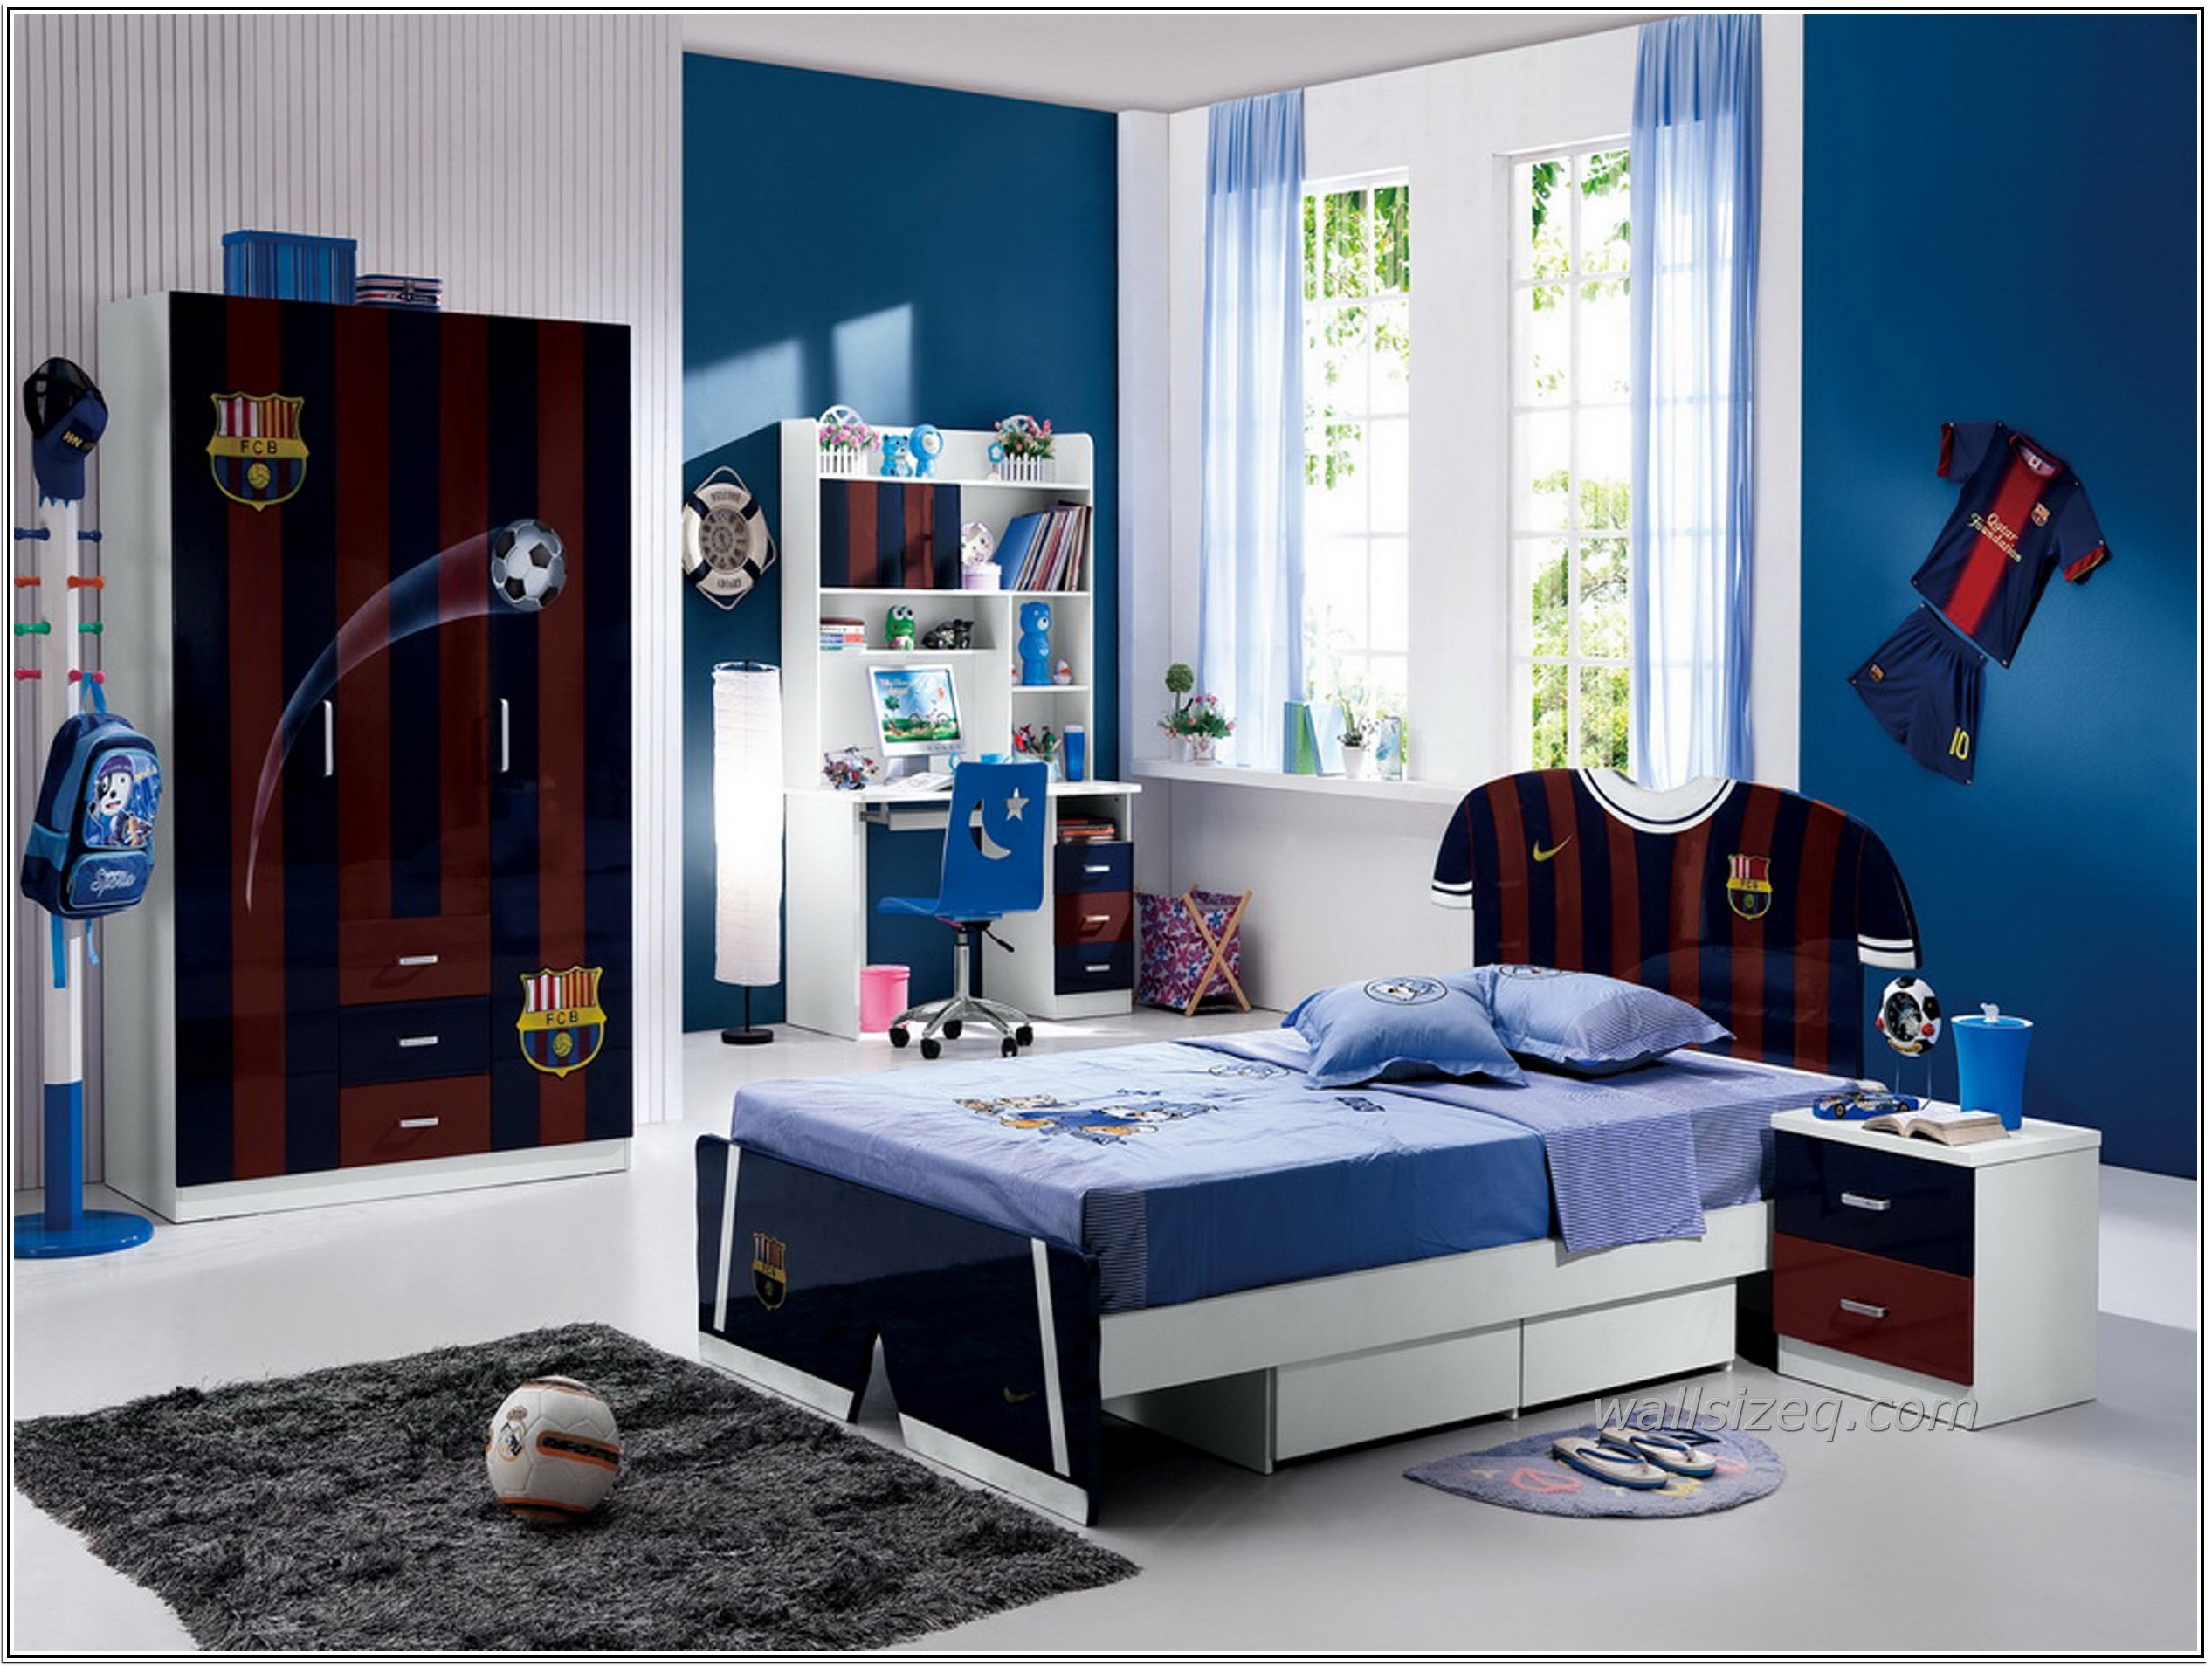 2533x1908 Kids Room Ideas Bedroom Cool Design Teenage Blue Light Wall Paint Wallpaper  With Size Page Impressive ...